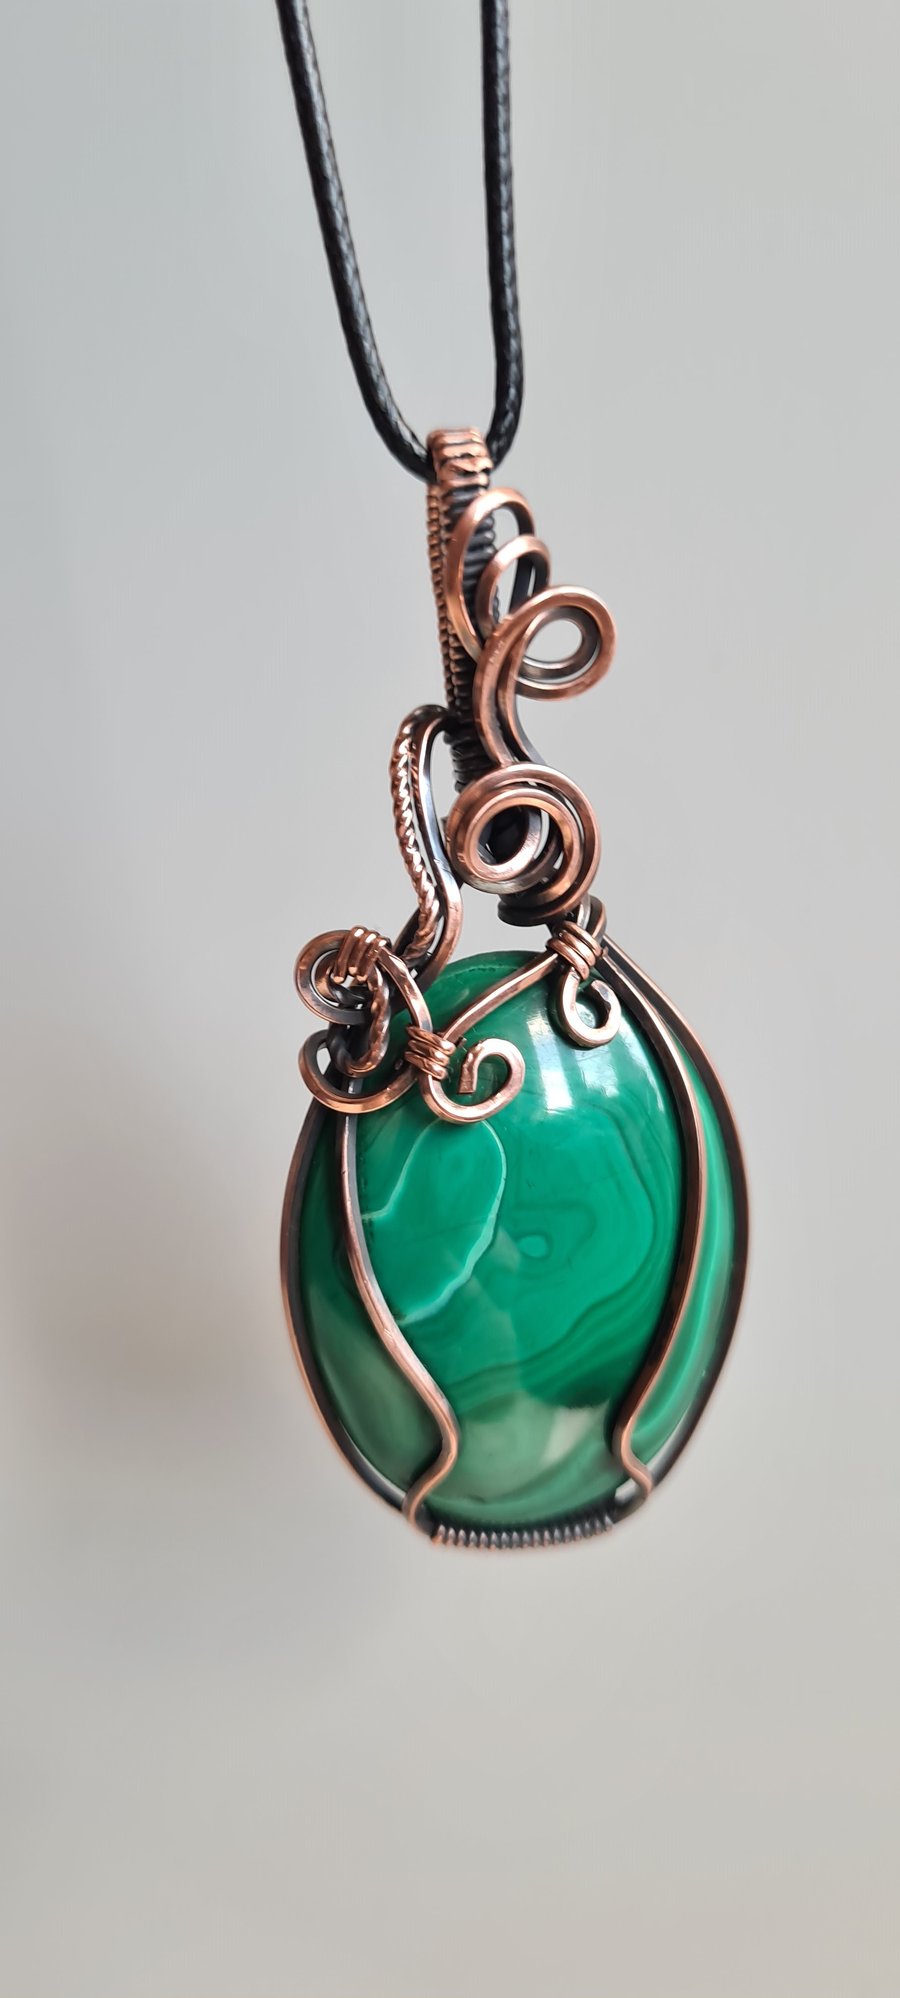 Handmade Large Natural Malachite & Copper Statement Pendant Necklace in Gift Box